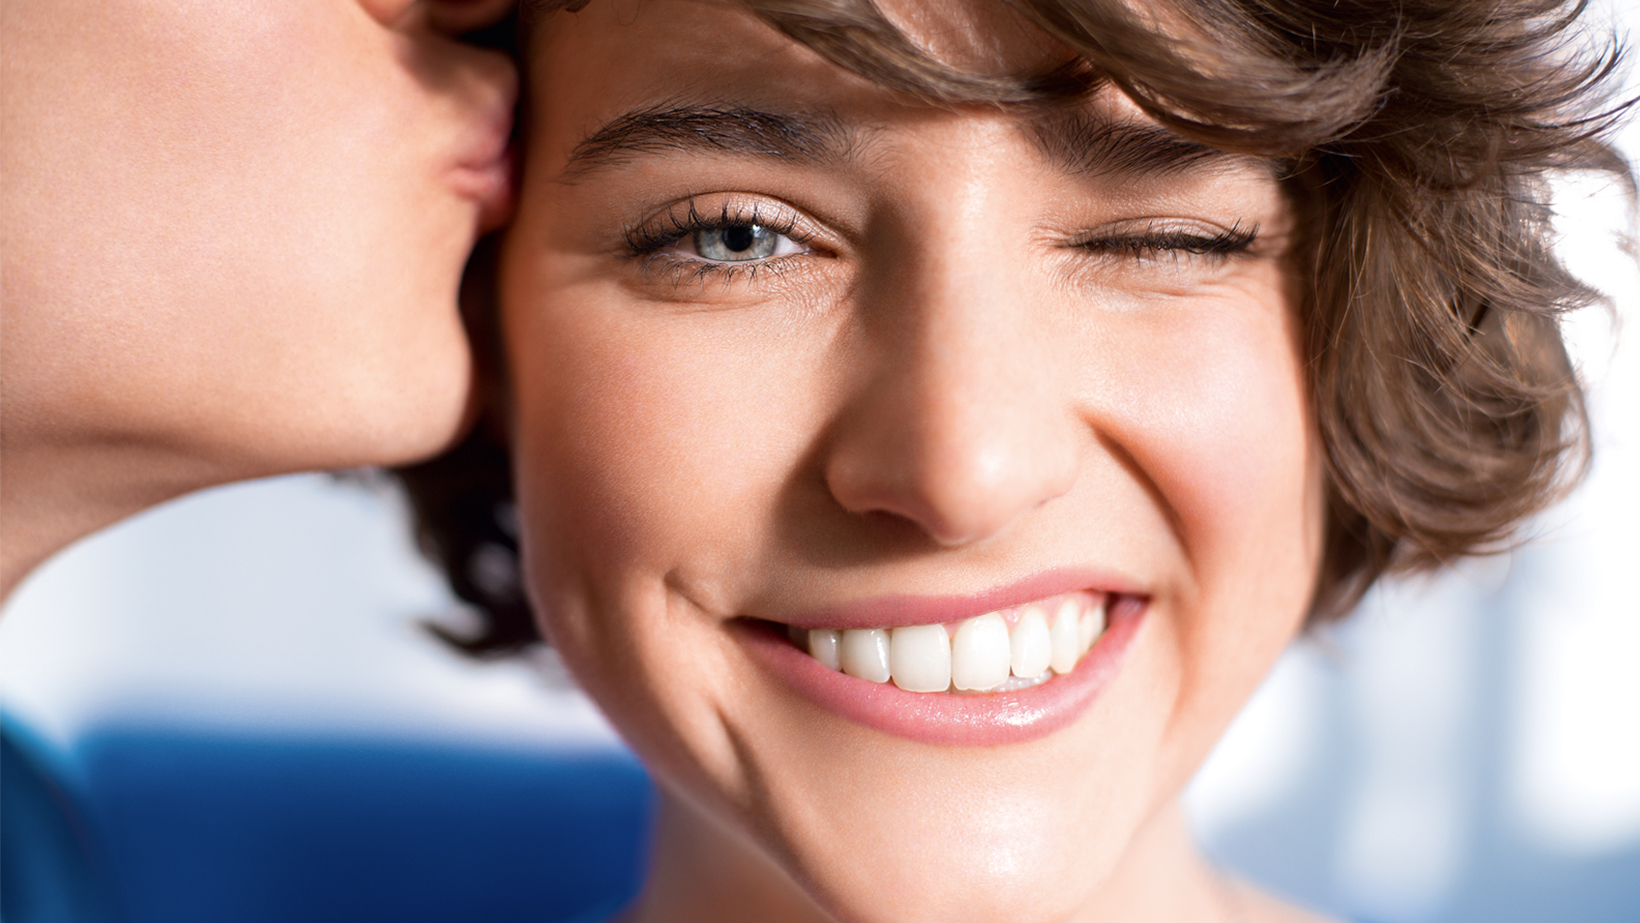 Smiling, brown-haired woman winking and being kissed on the temple.